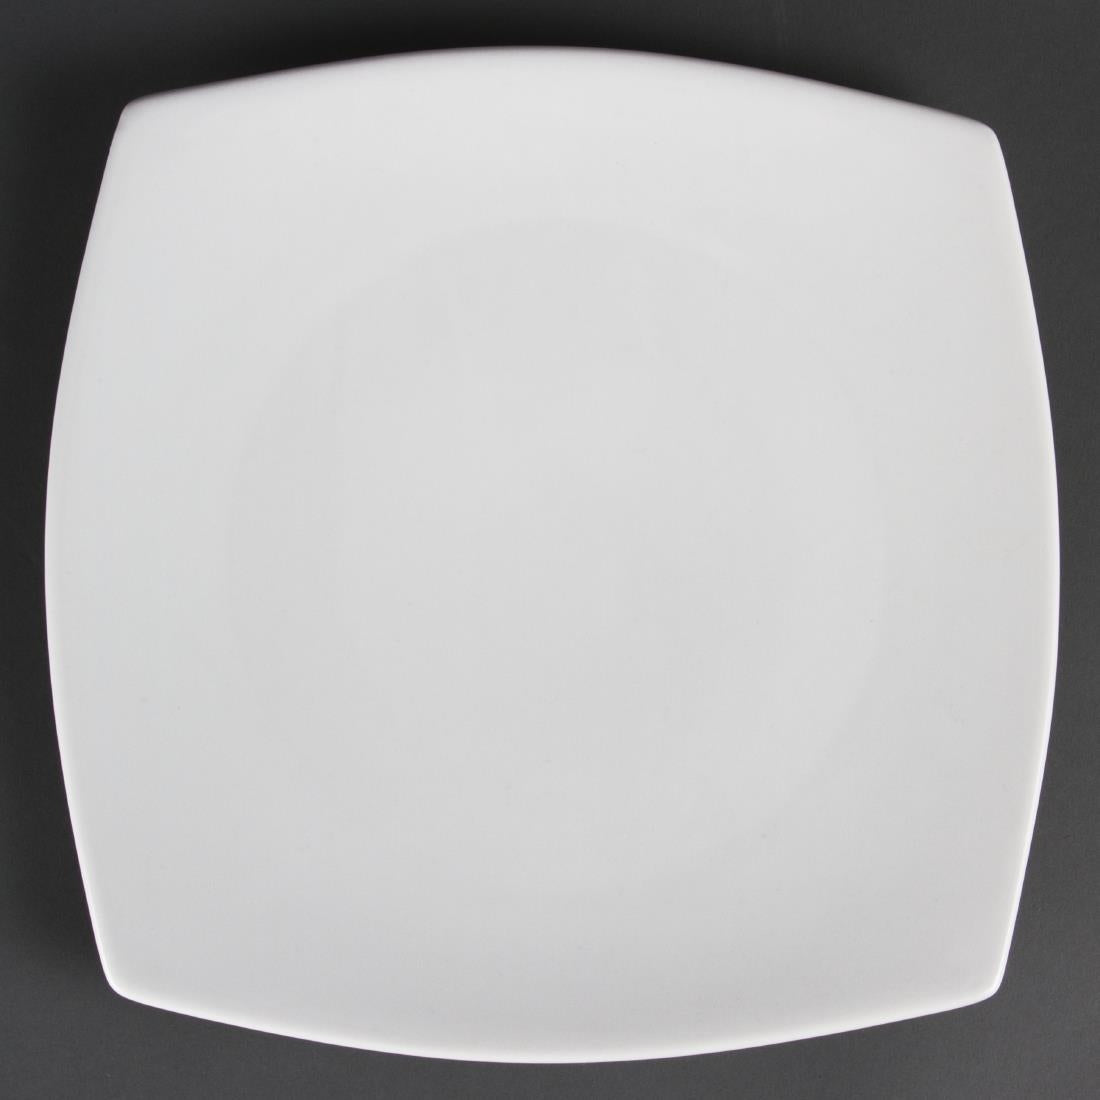 CB493 Olympia Whiteware Rounded Square Plates 270mm (Pack of 6)